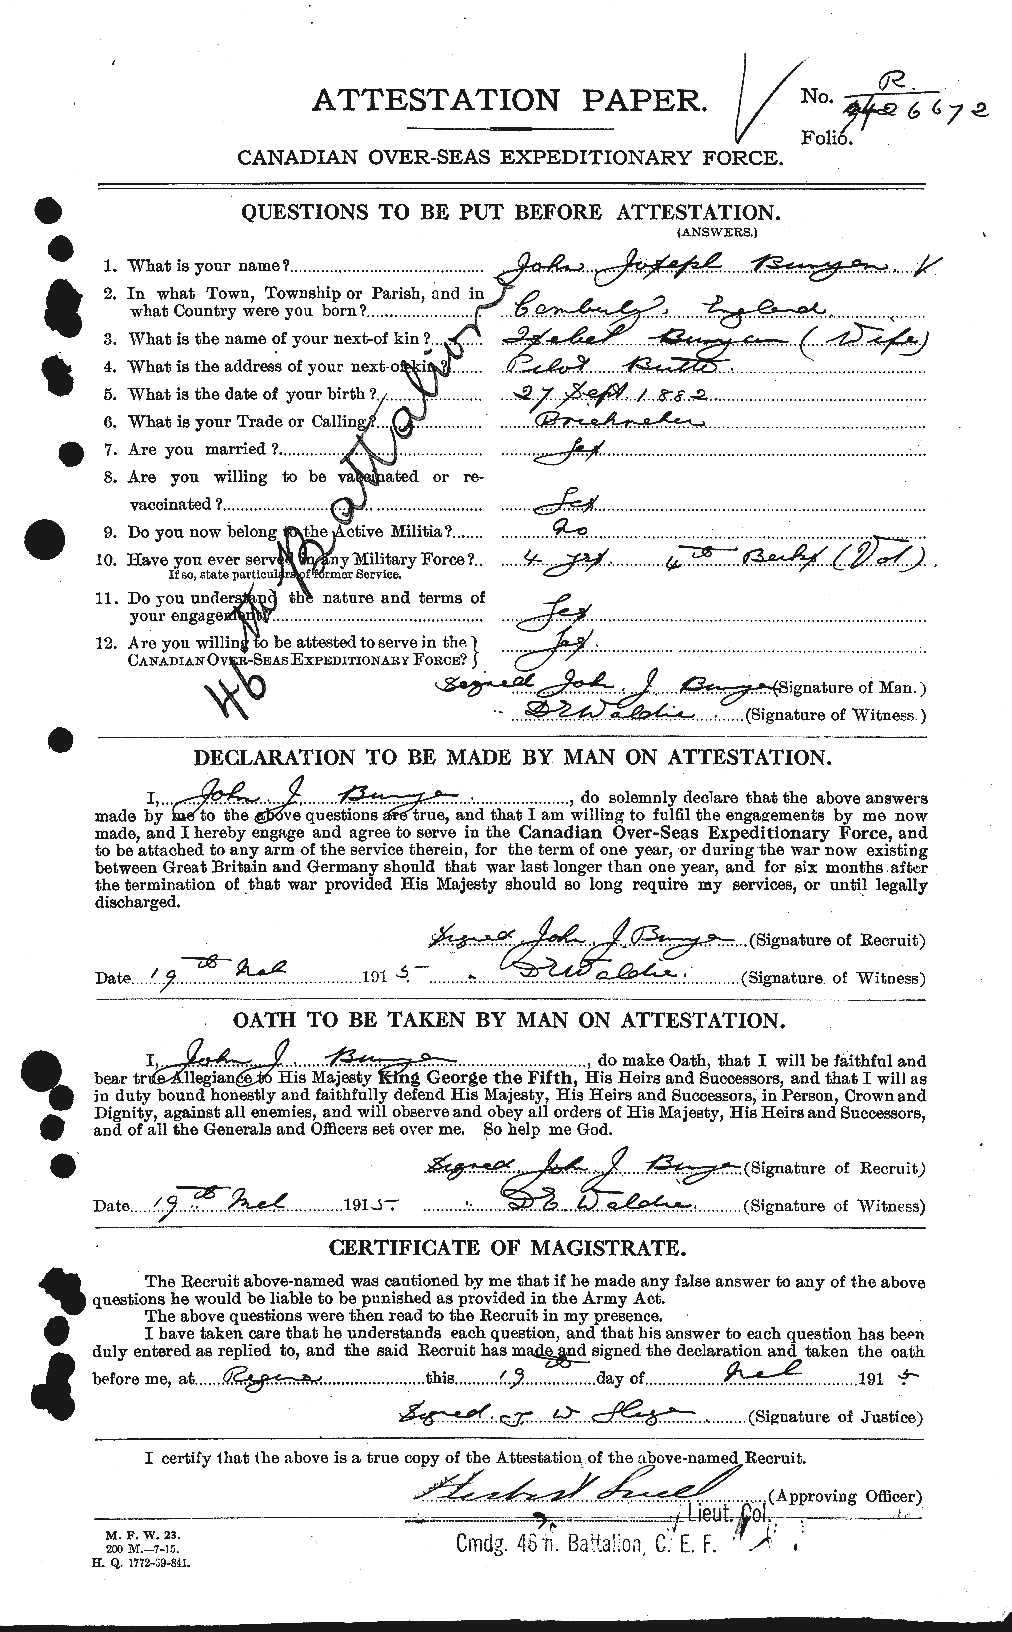 Personnel Records of the First World War - CEF 270993a